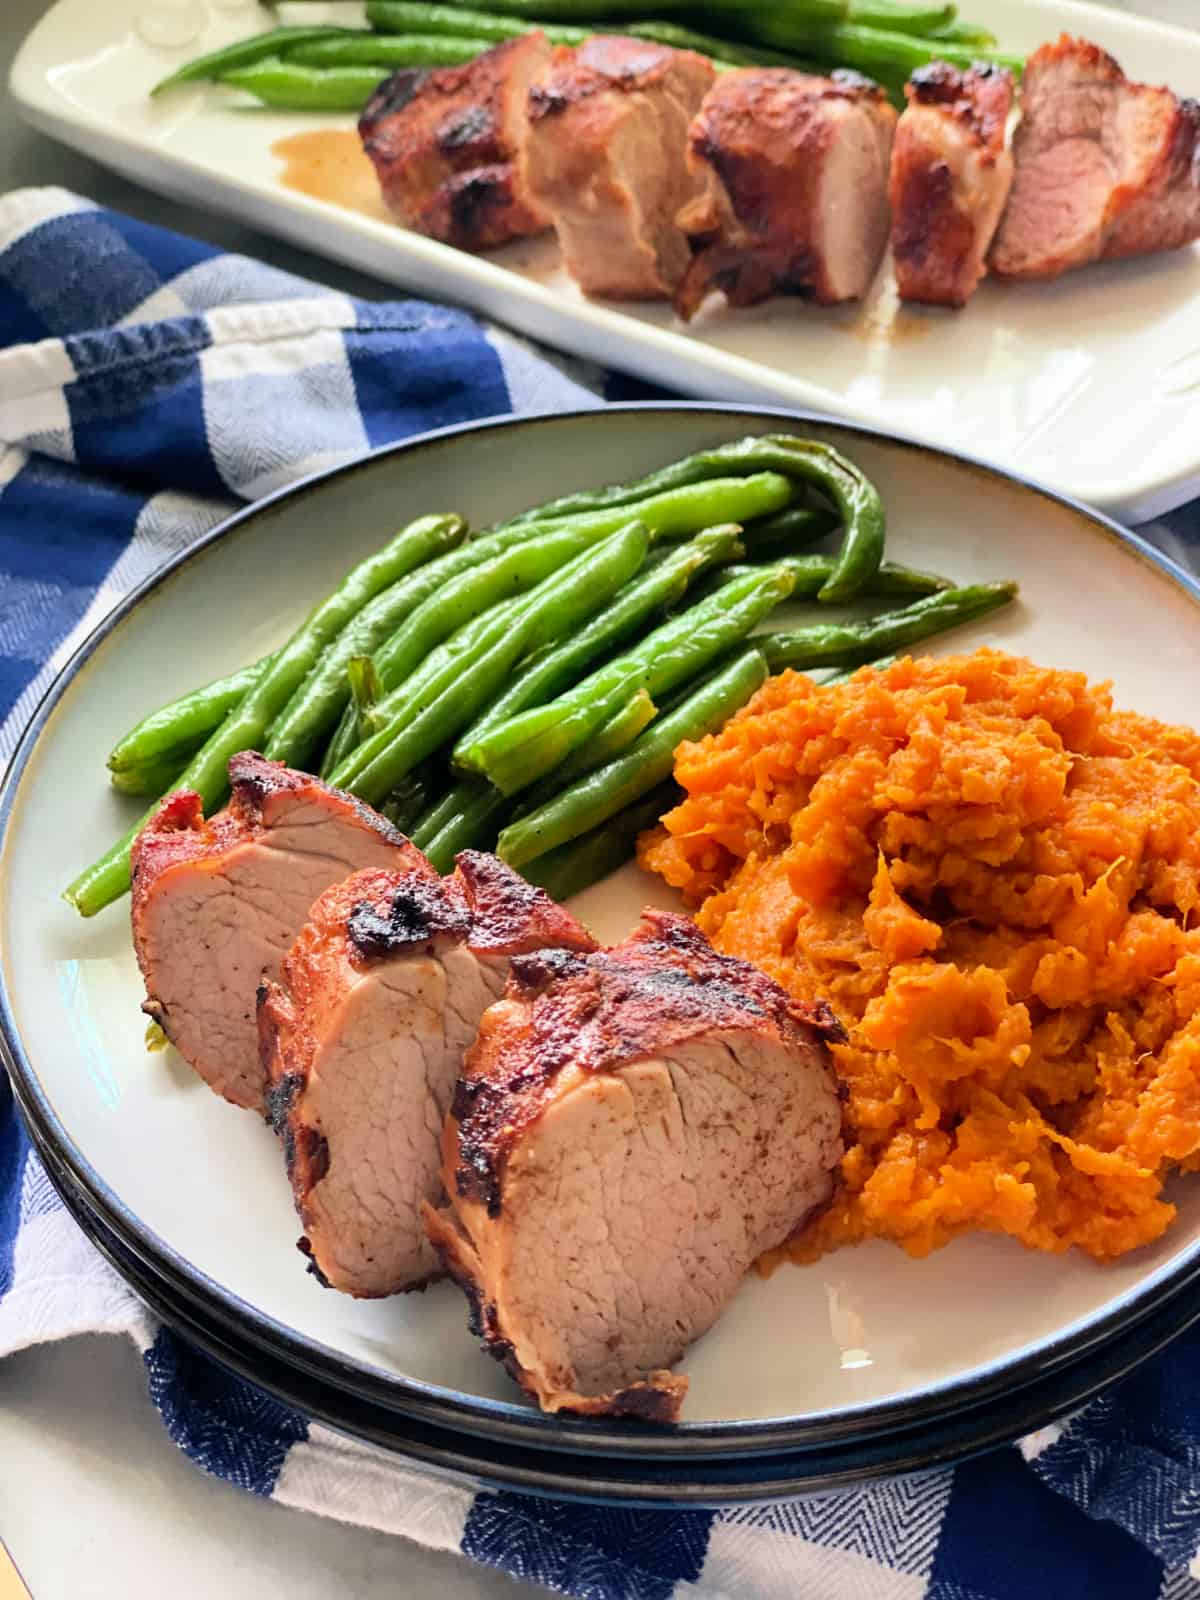 Plate with three slices of pork, green beans, and sweet potatoes.